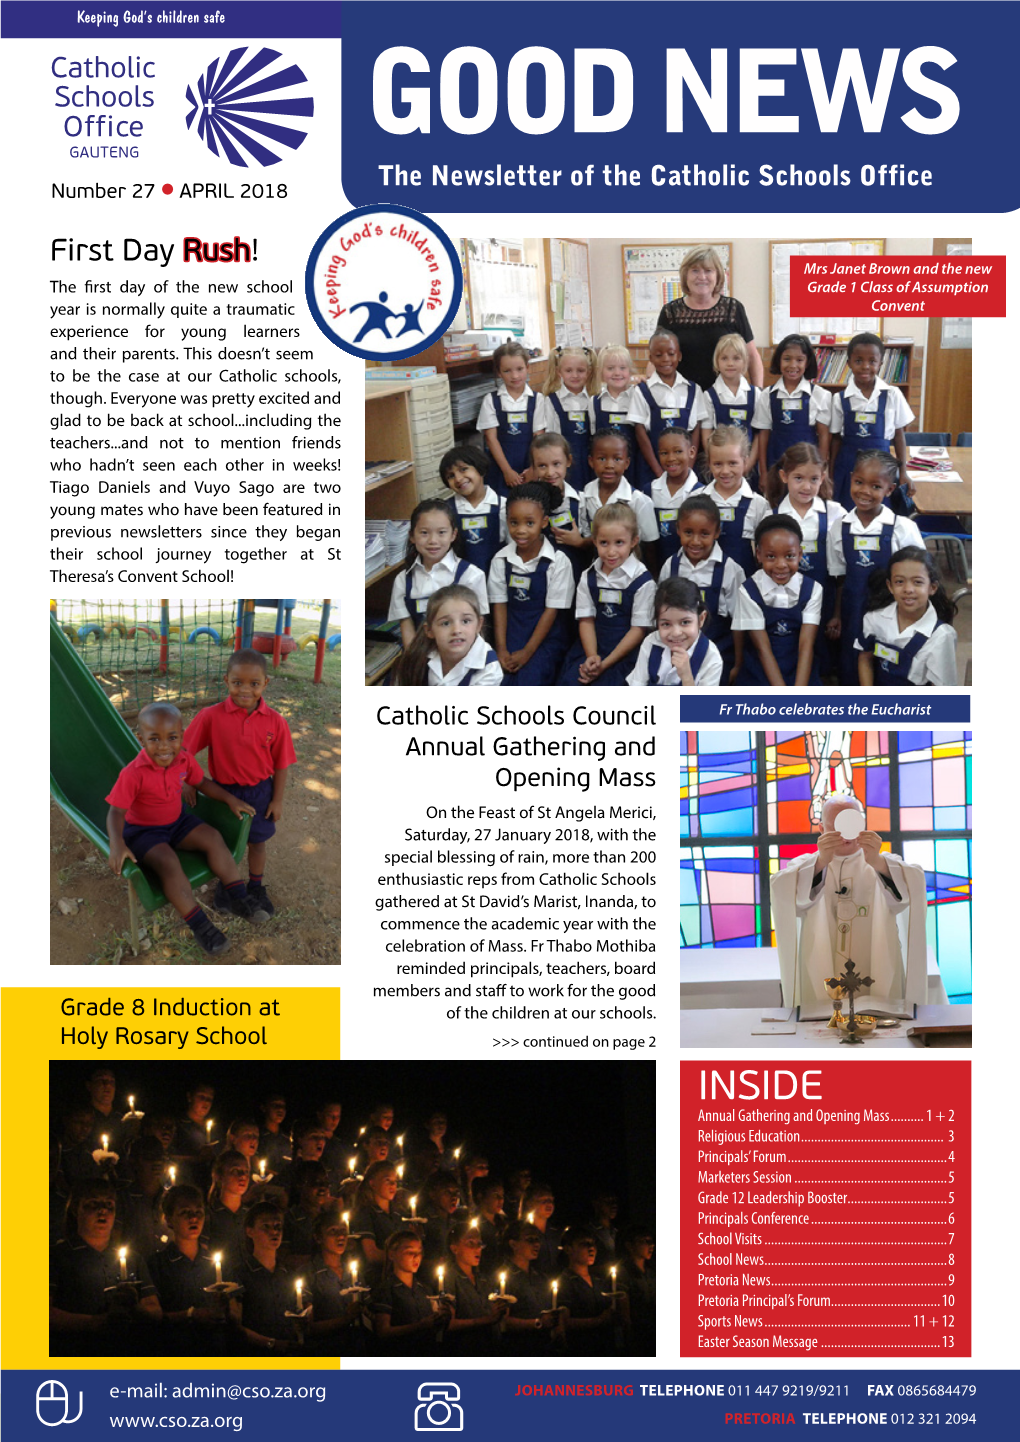 GOOD NEWS GAUTENG the Newsletter of the Catholic Schools Office Number 27 L APRIL 2018